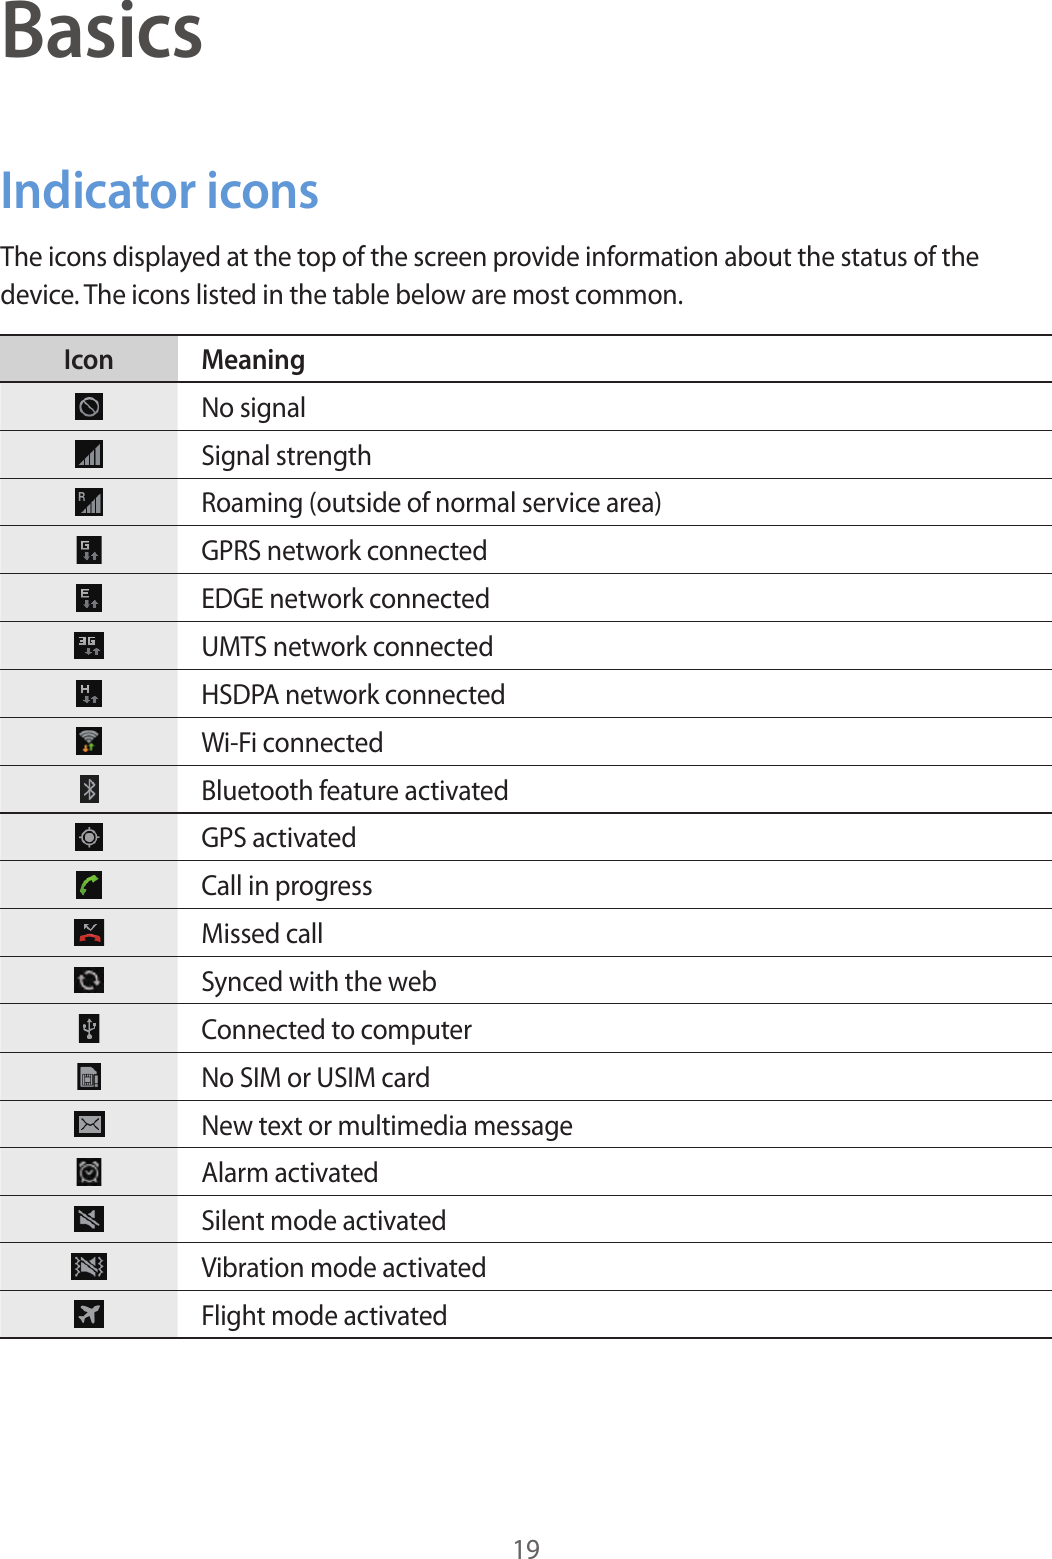 19BasicsIndicator iconsThe icons displayed at the top of the screen provide information about the status of the device. The icons listed in the table below are most common.Icon MeaningNo signalSignal strengthRoaming (outside of normal service area)GPRS network connectedEDGE network connectedUMTS network connectedHSDPA network connectedWi-Fi connectedBluetooth feature activatedGPS activatedCall in progressMissed callSynced with the webConnected to computerNo SIM or USIM cardNew text or multimedia messageAlarm activatedSilent mode activatedVibration mode activatedFlight mode activated